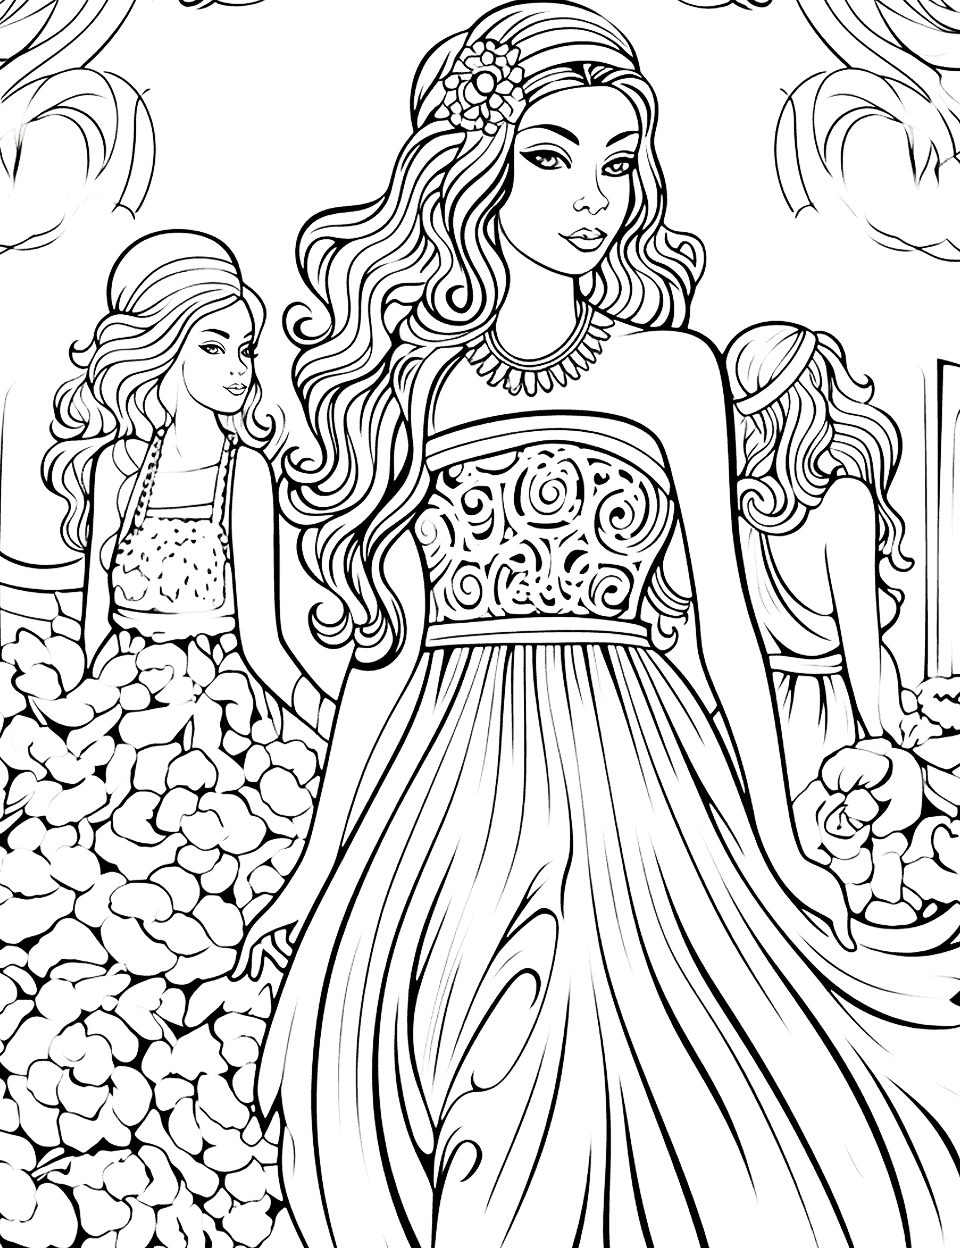 Fashion Runway Adult Coloring Page - An intricate coloring page depicting models on a fashion runway.